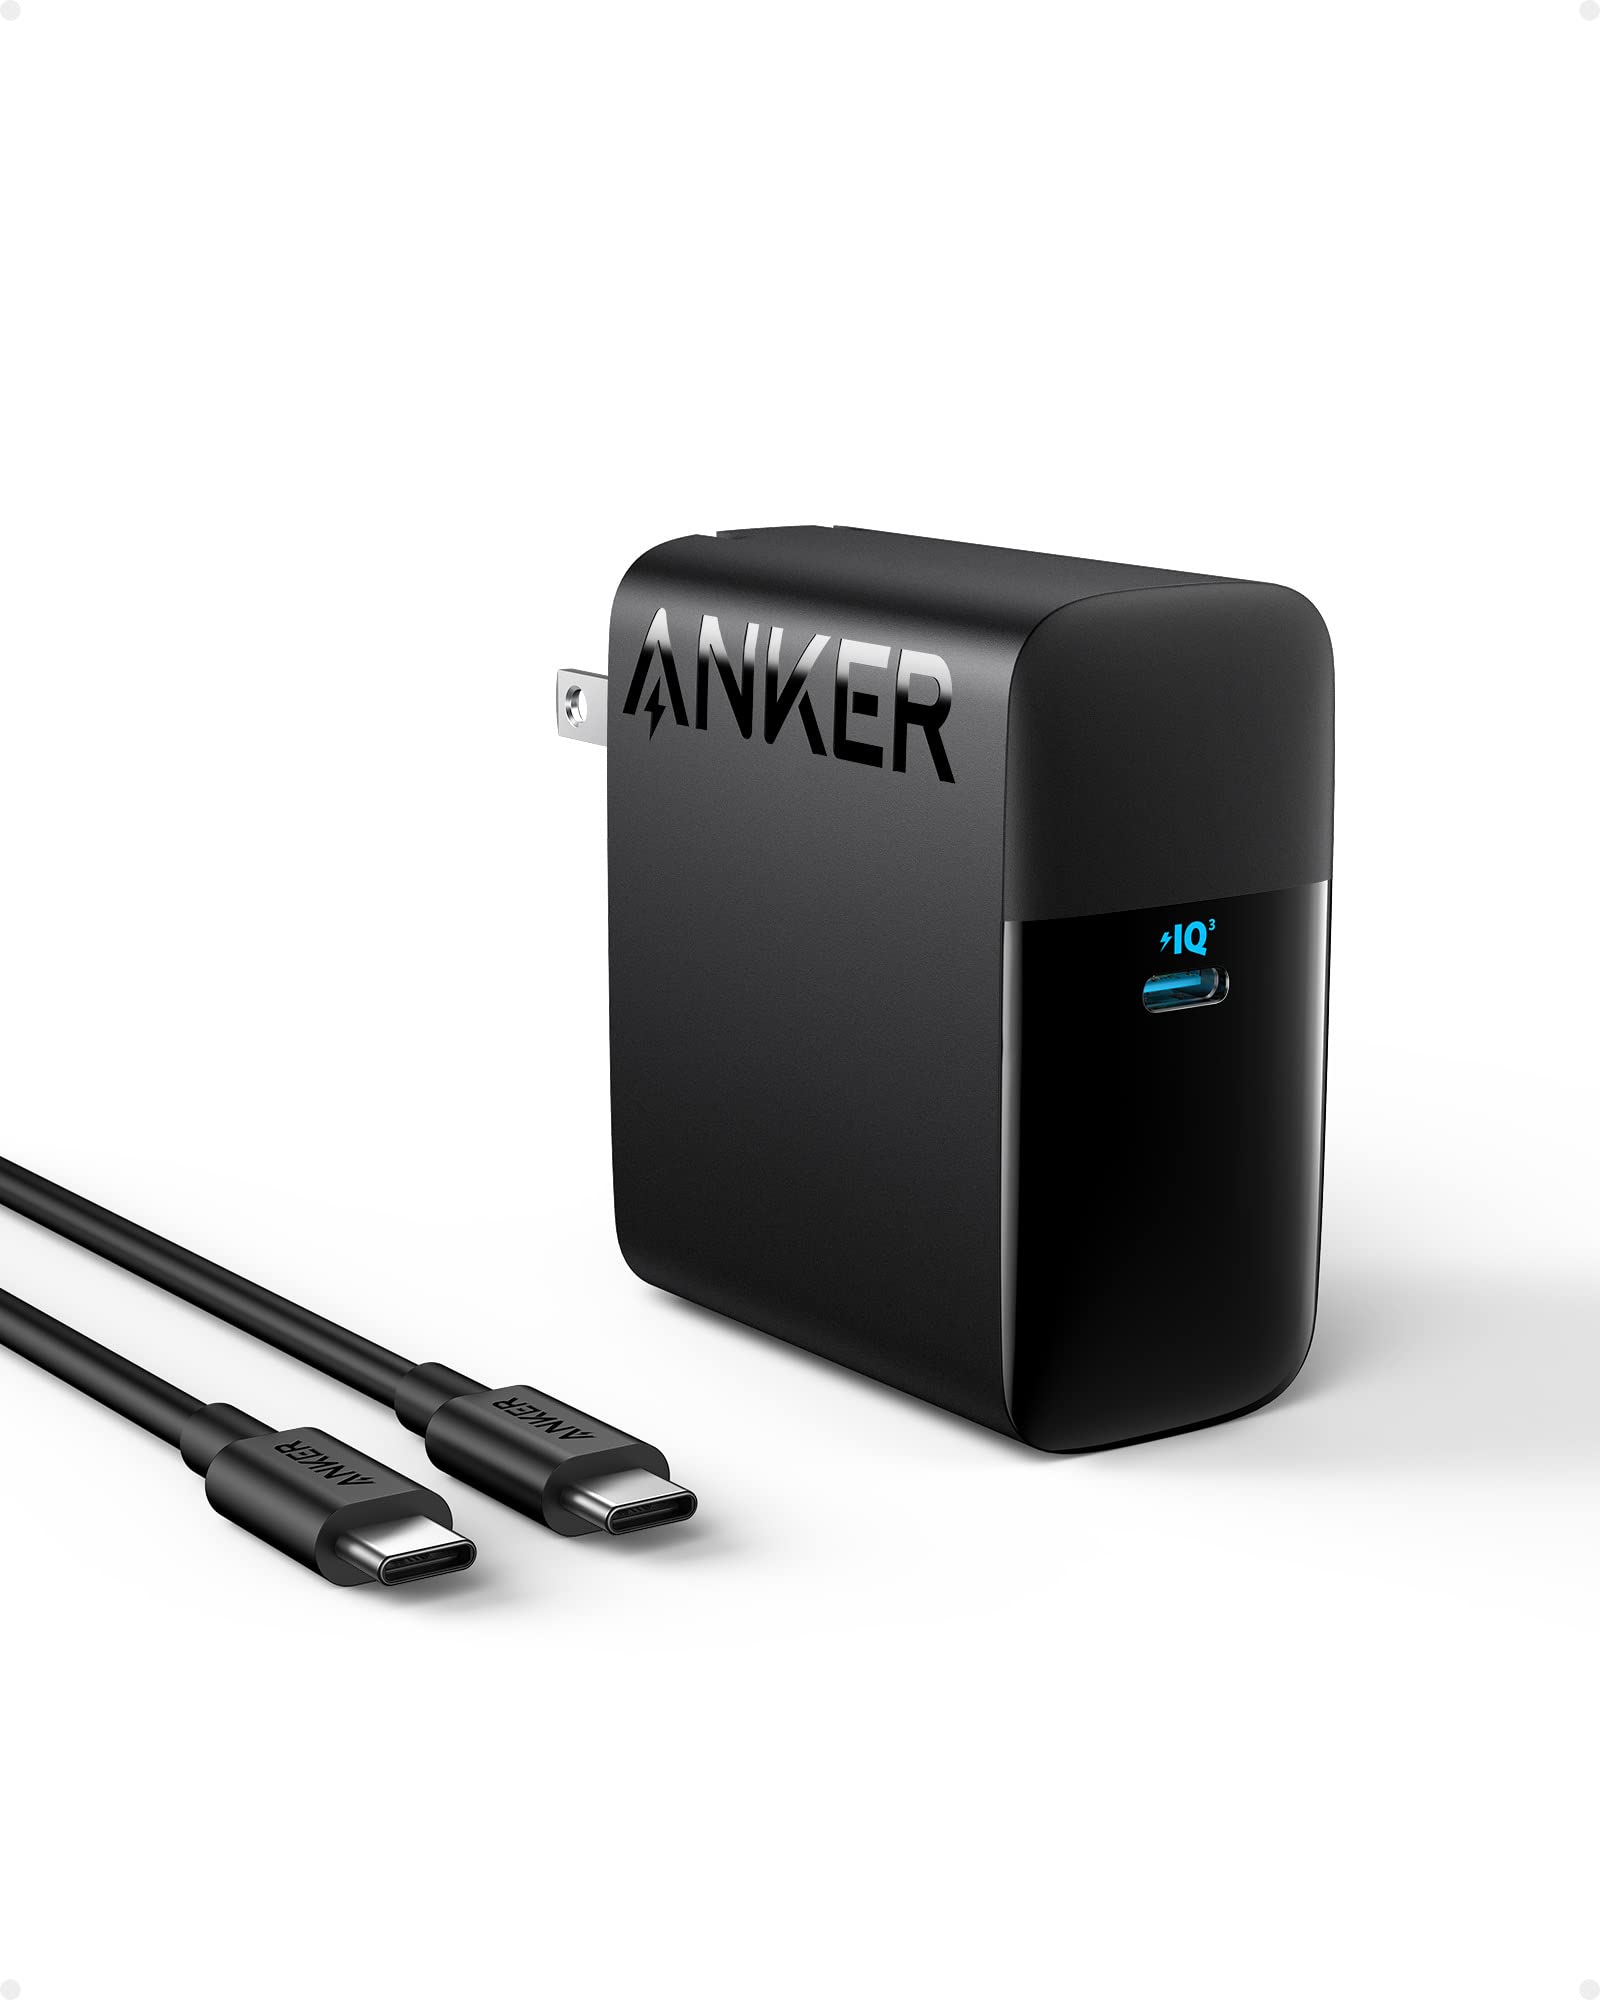 Mac Book Pro Charger, 100W USB C Charger, Anker Compact and Foldable Fast Charger for MacBook Air, Samsung Galaxy, iPad Pro, 5 ft USB C to USB C Cable Included $24.99